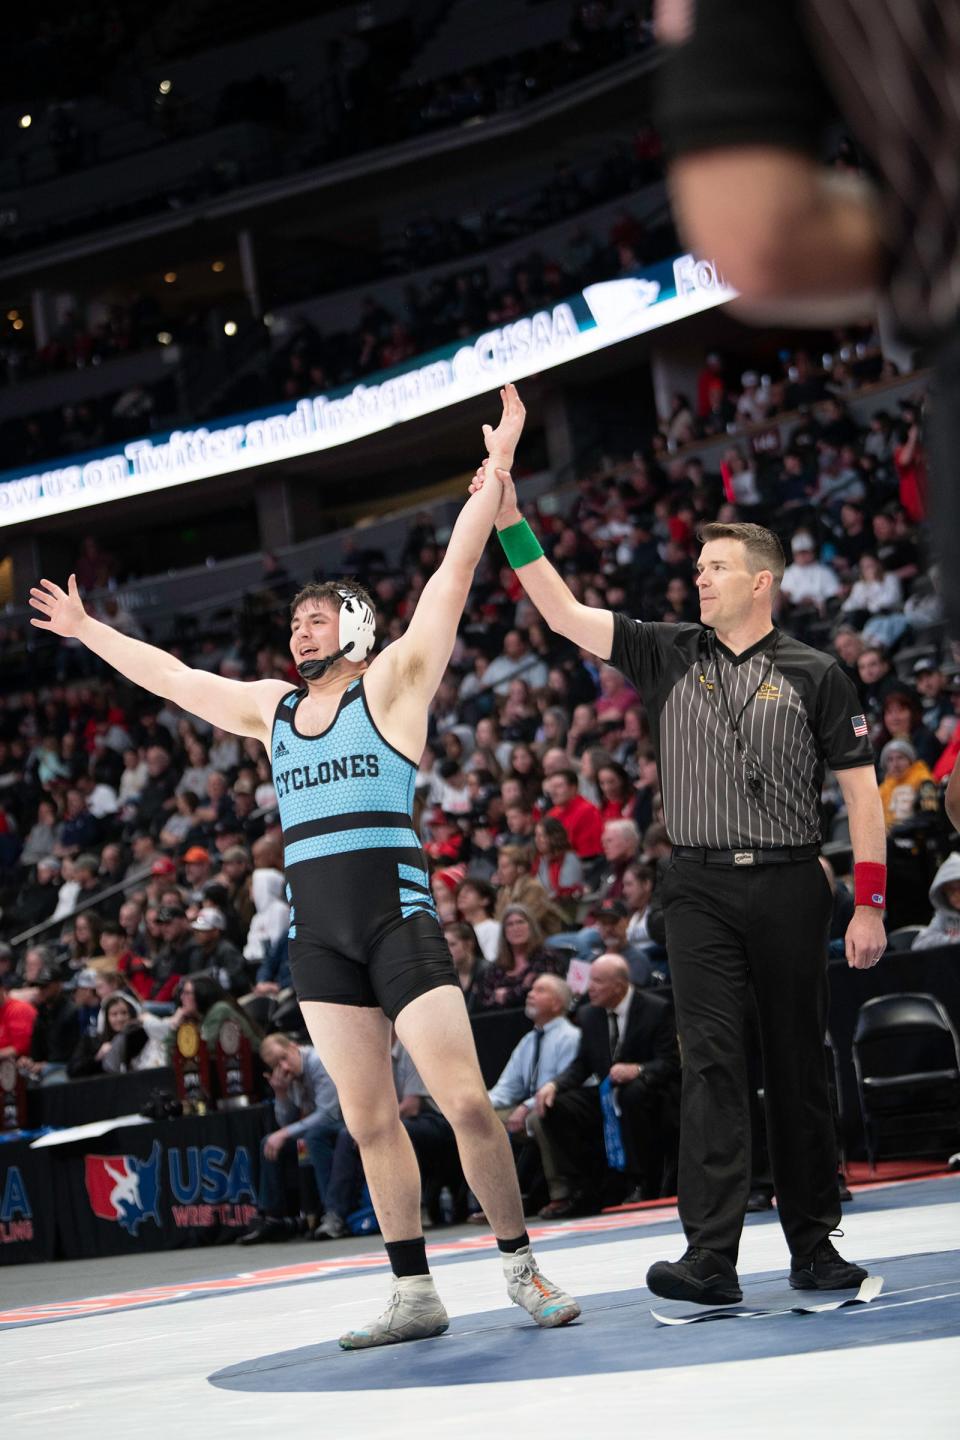 Pueblo West's Thomas Mayer has his hand raised as the winner of the 215-pound championship match of the Class 4A state wrestling tournament at Ball Arena on Saturday, Feb. 18, 2023.